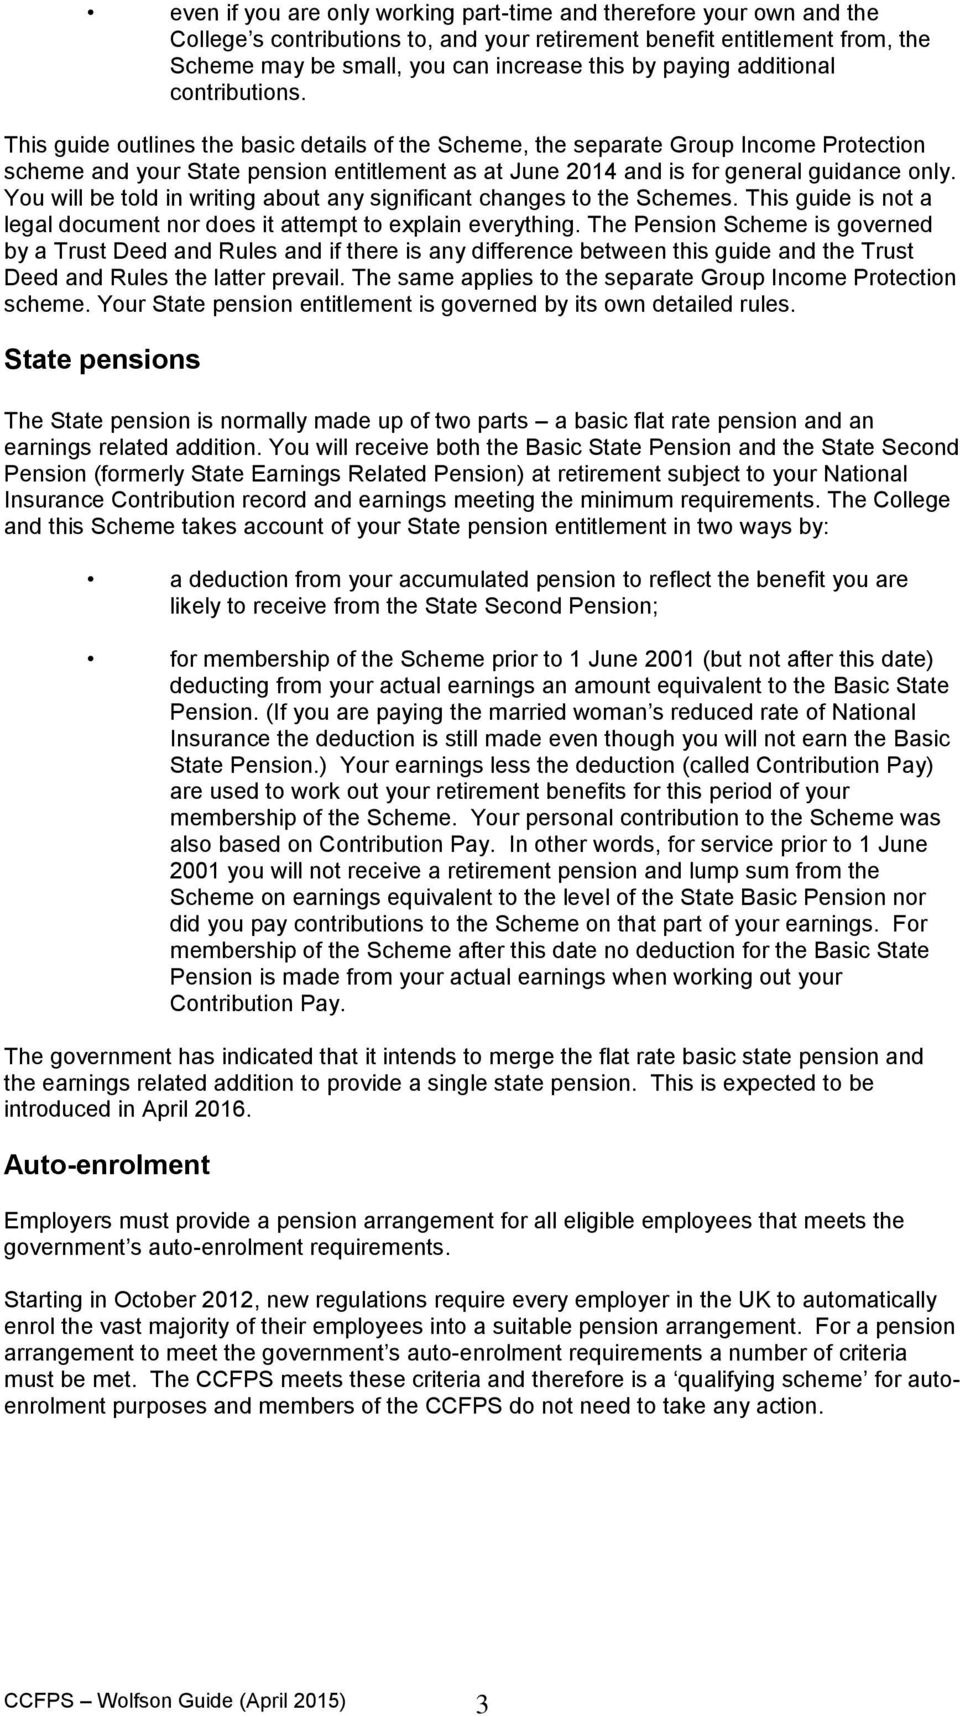 This guide outlines the basic details of the Scheme, the separate Group Income Protection scheme and your State pension entitlement as at June 2014 and is for general guidance only.